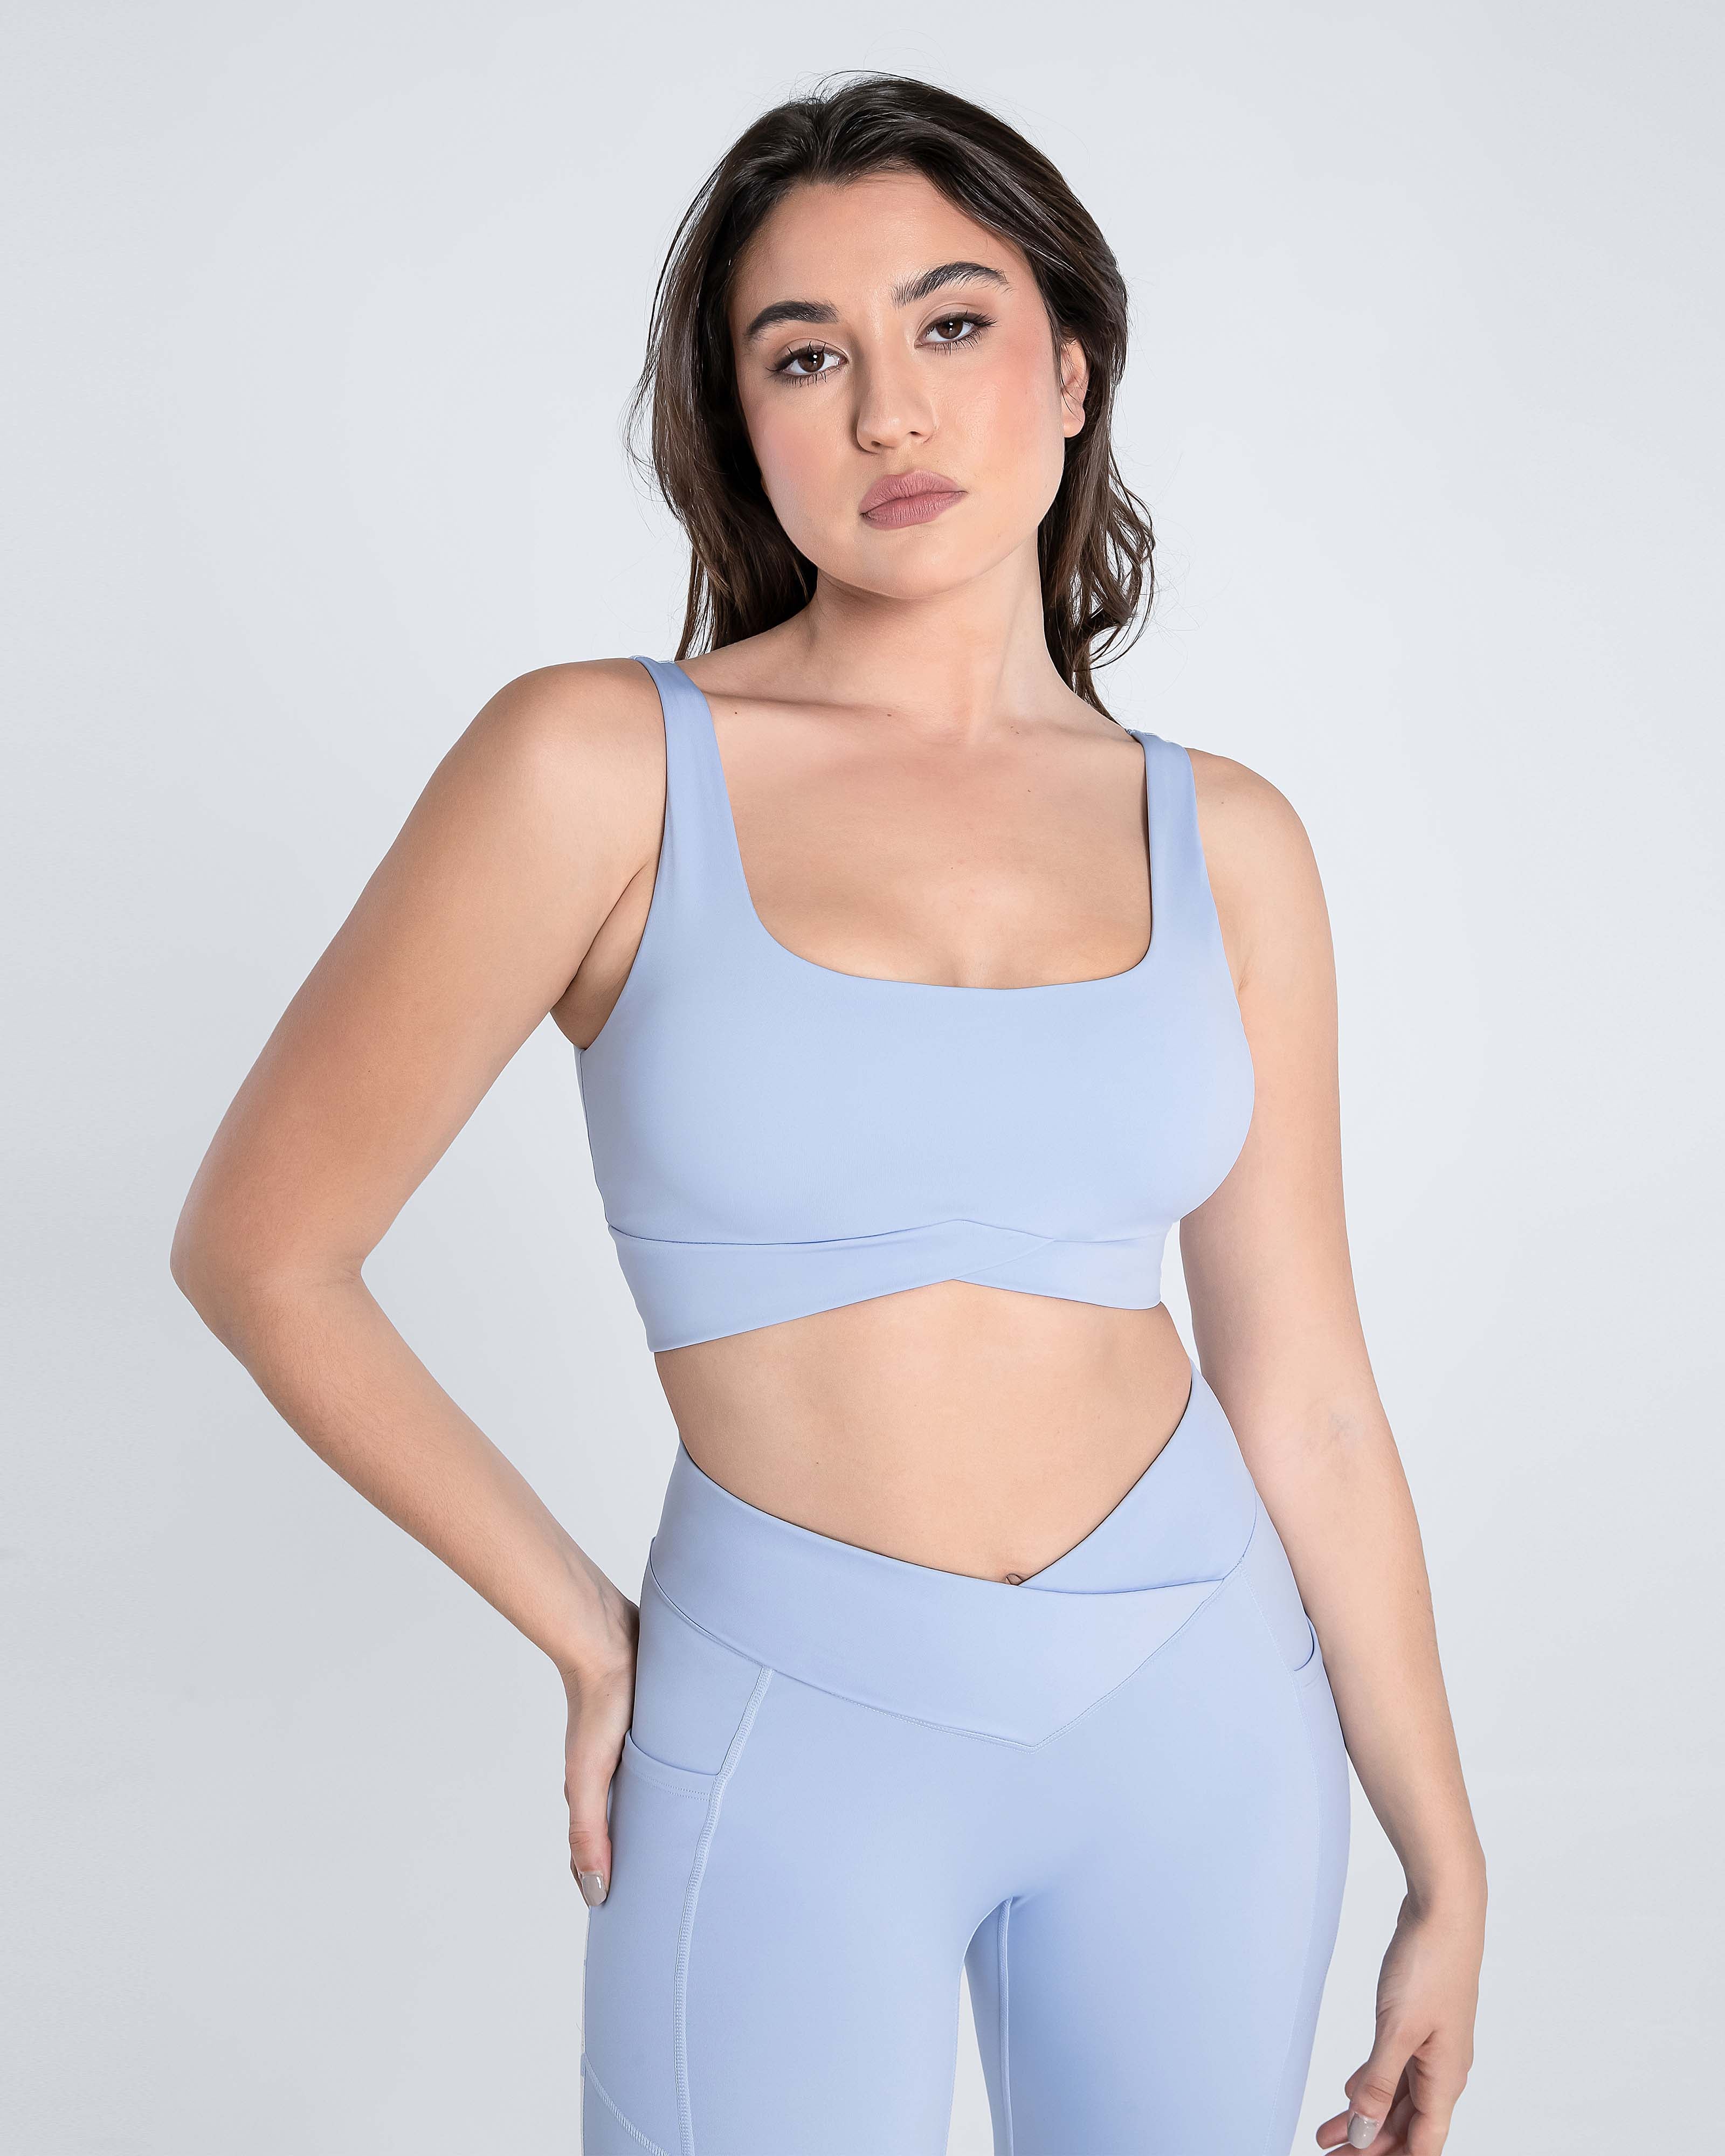 The Best Place to Buy Sportswear for Women – Cosmolle